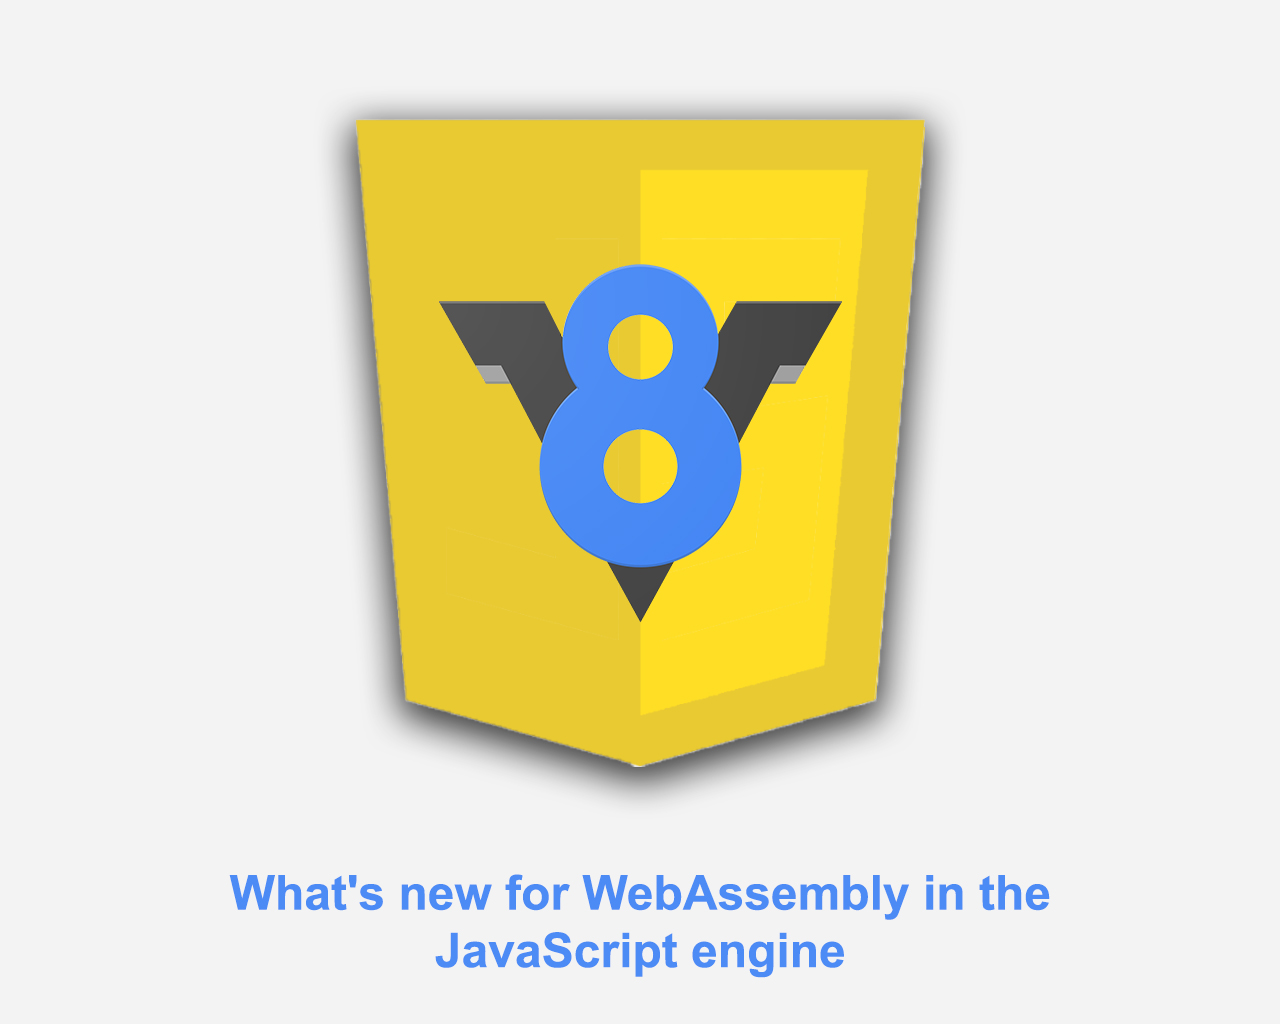 V8 7.5: What's new for WebAssembly in the JavaScript engine